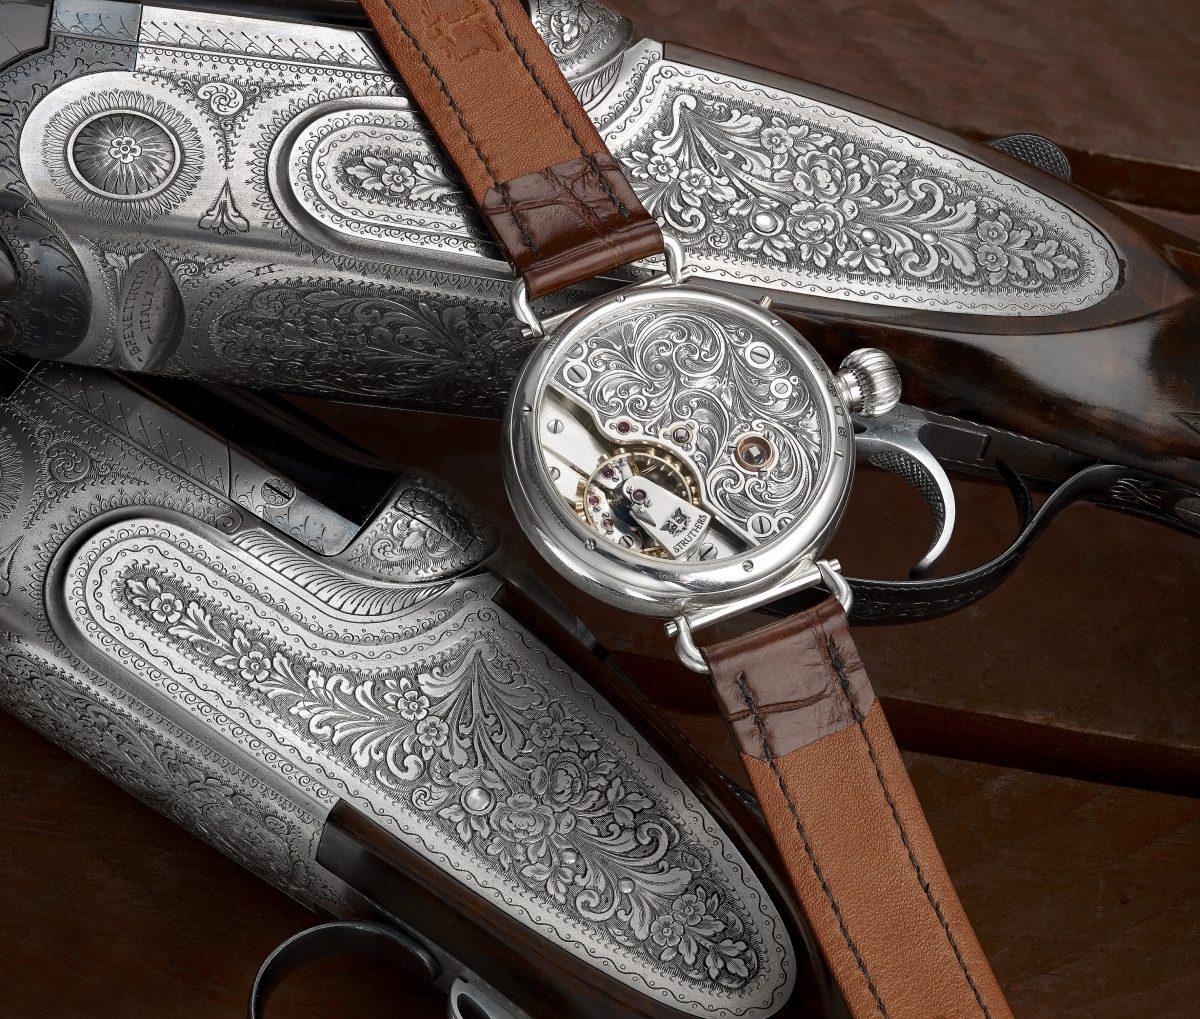 The traditional acanthus scroll engraving on the dial and movement of the "Struthers Kullberg Edition" watch was completed by an independent gun engraver. (Claire Cleaver)